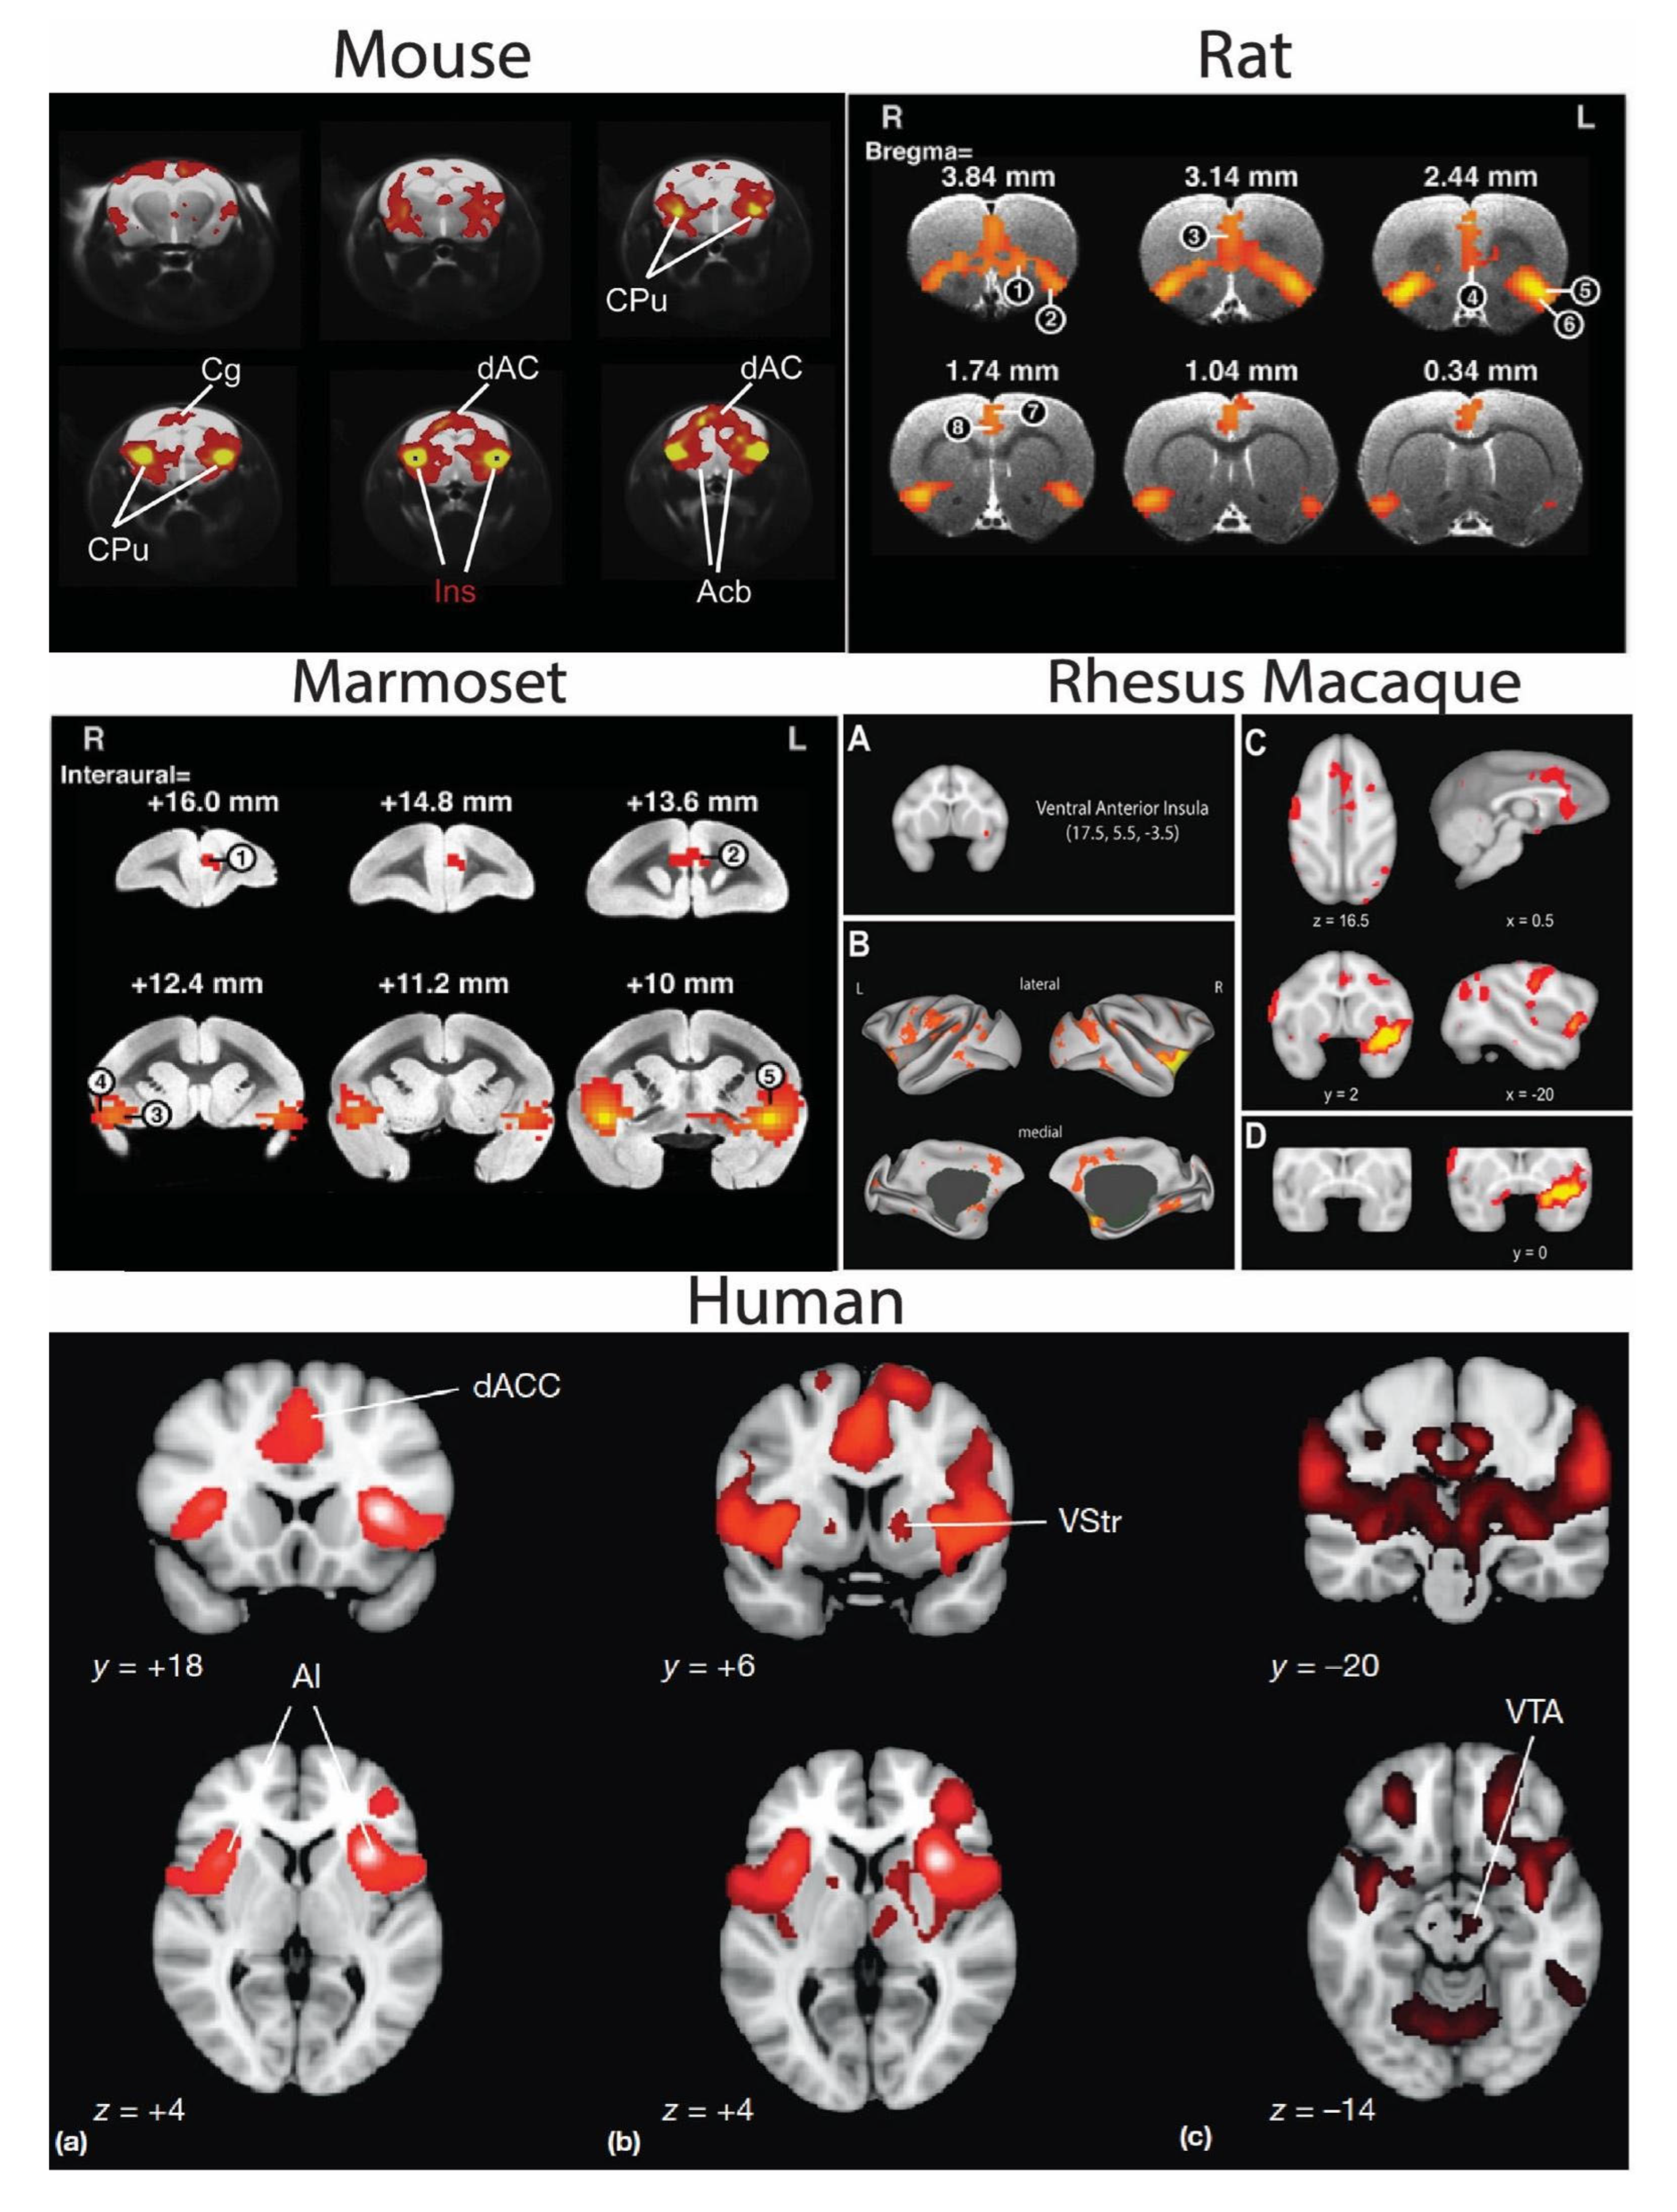 Where is Cingulate Cortex? A Cross-Species View: Trends in